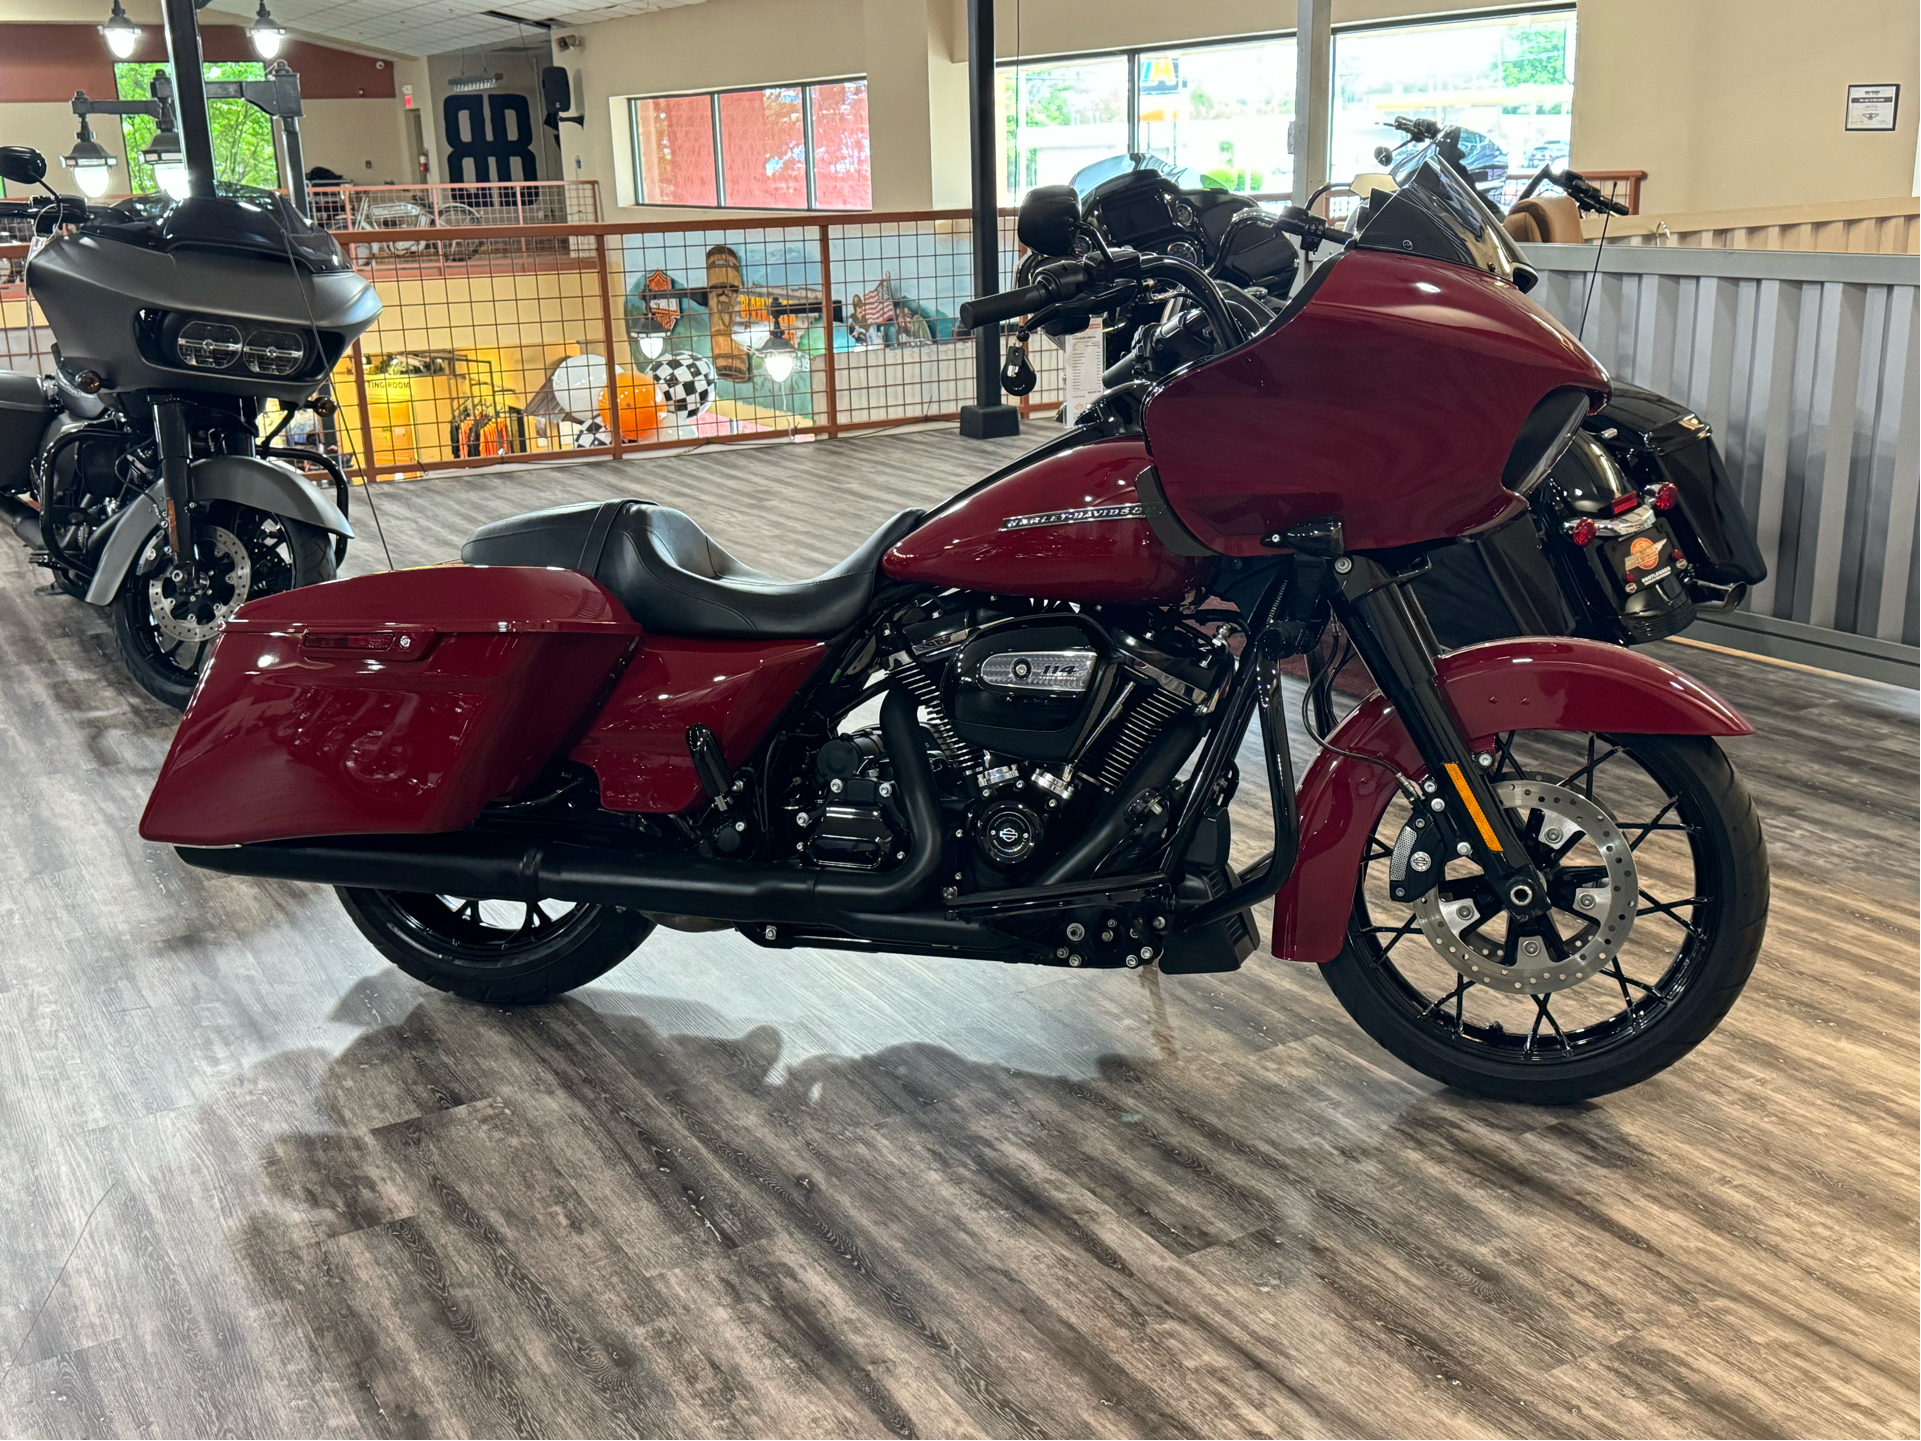 2020 Harley-Davidson Road Glide® Special in Knoxville, Tennessee - Photo 1